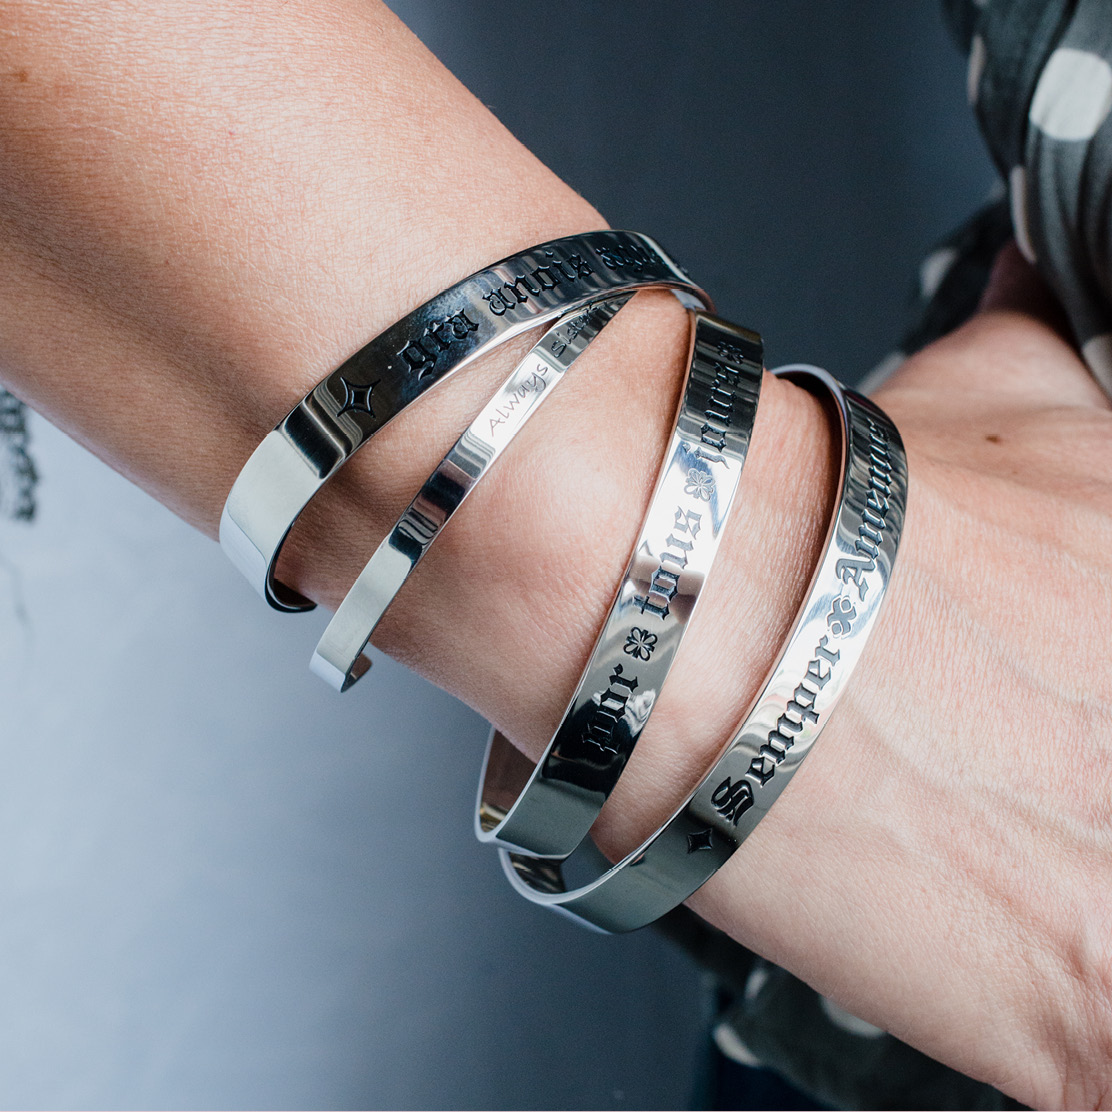 Stainless Steel Jewelry - Sustainable Jewelry to Last a Lifetime